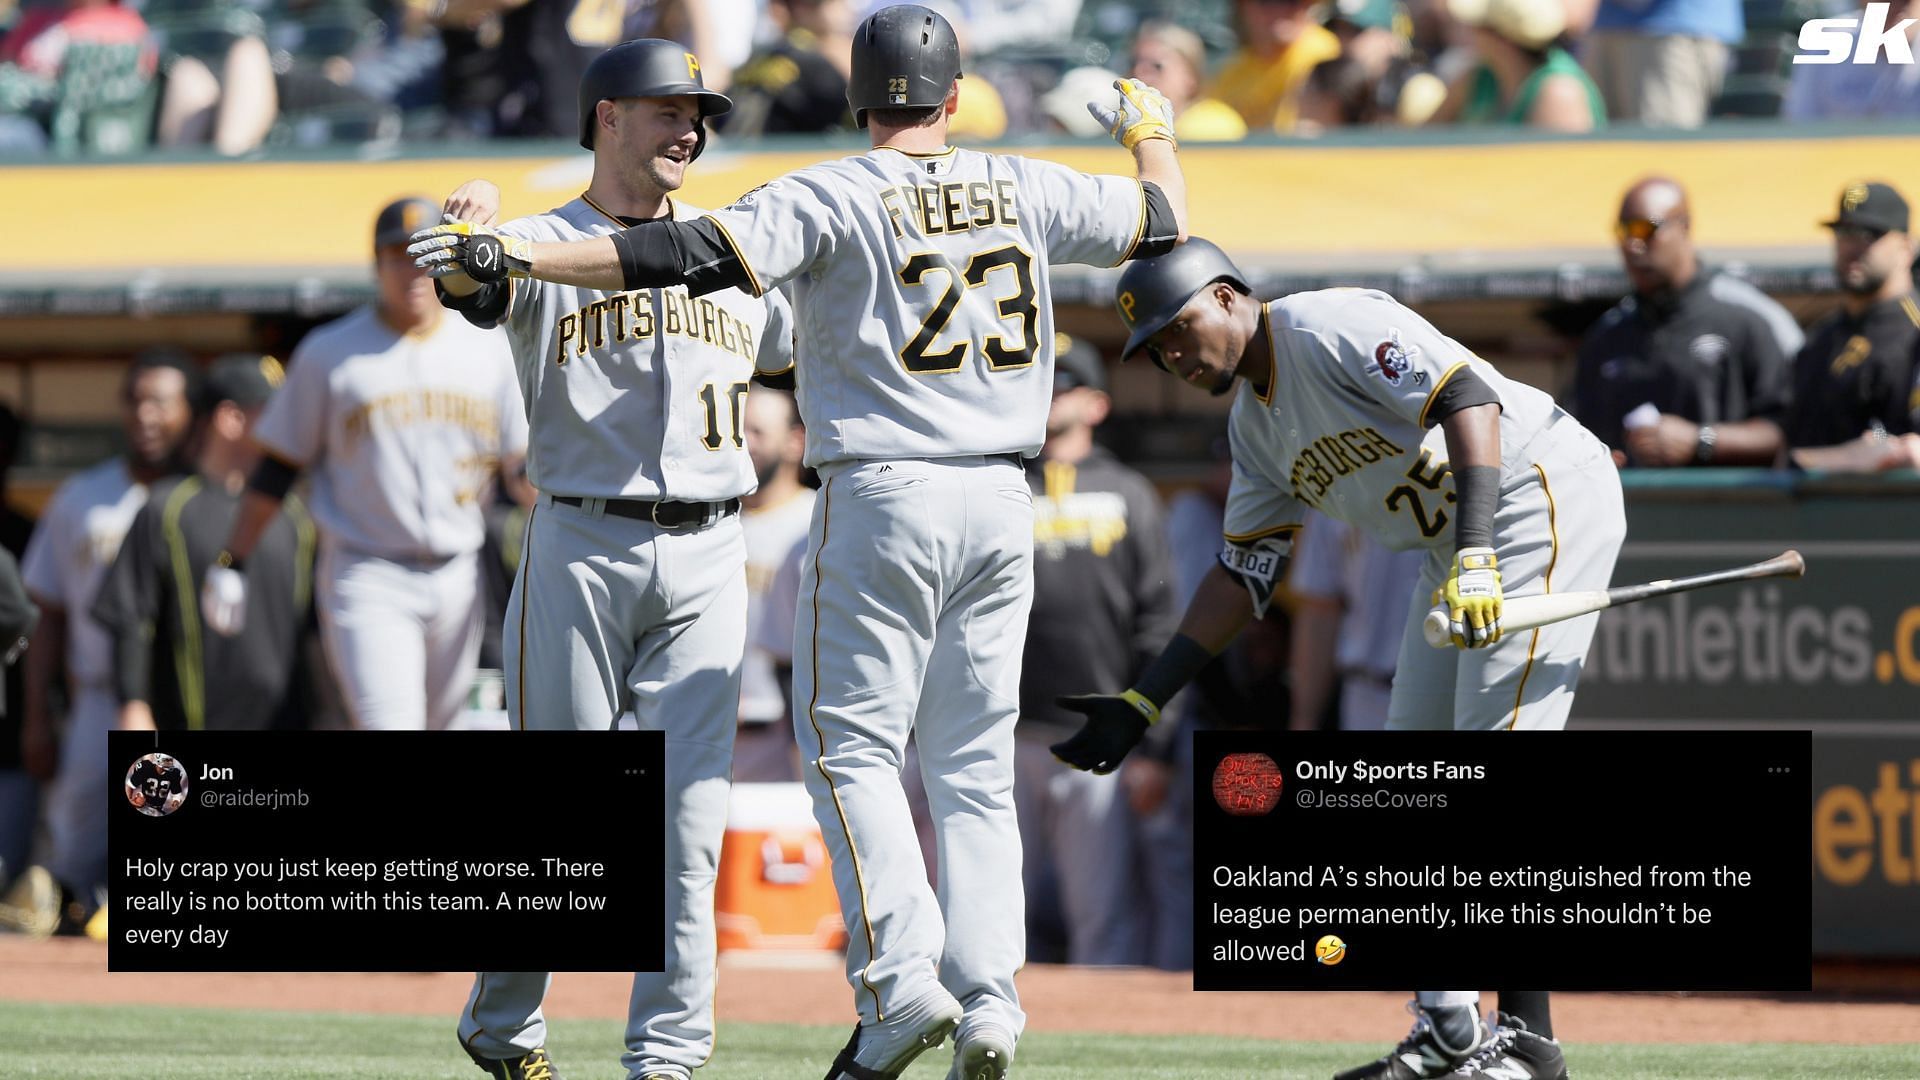 Pittsburgh Pirates players celebrate after scoring against the Oakland A